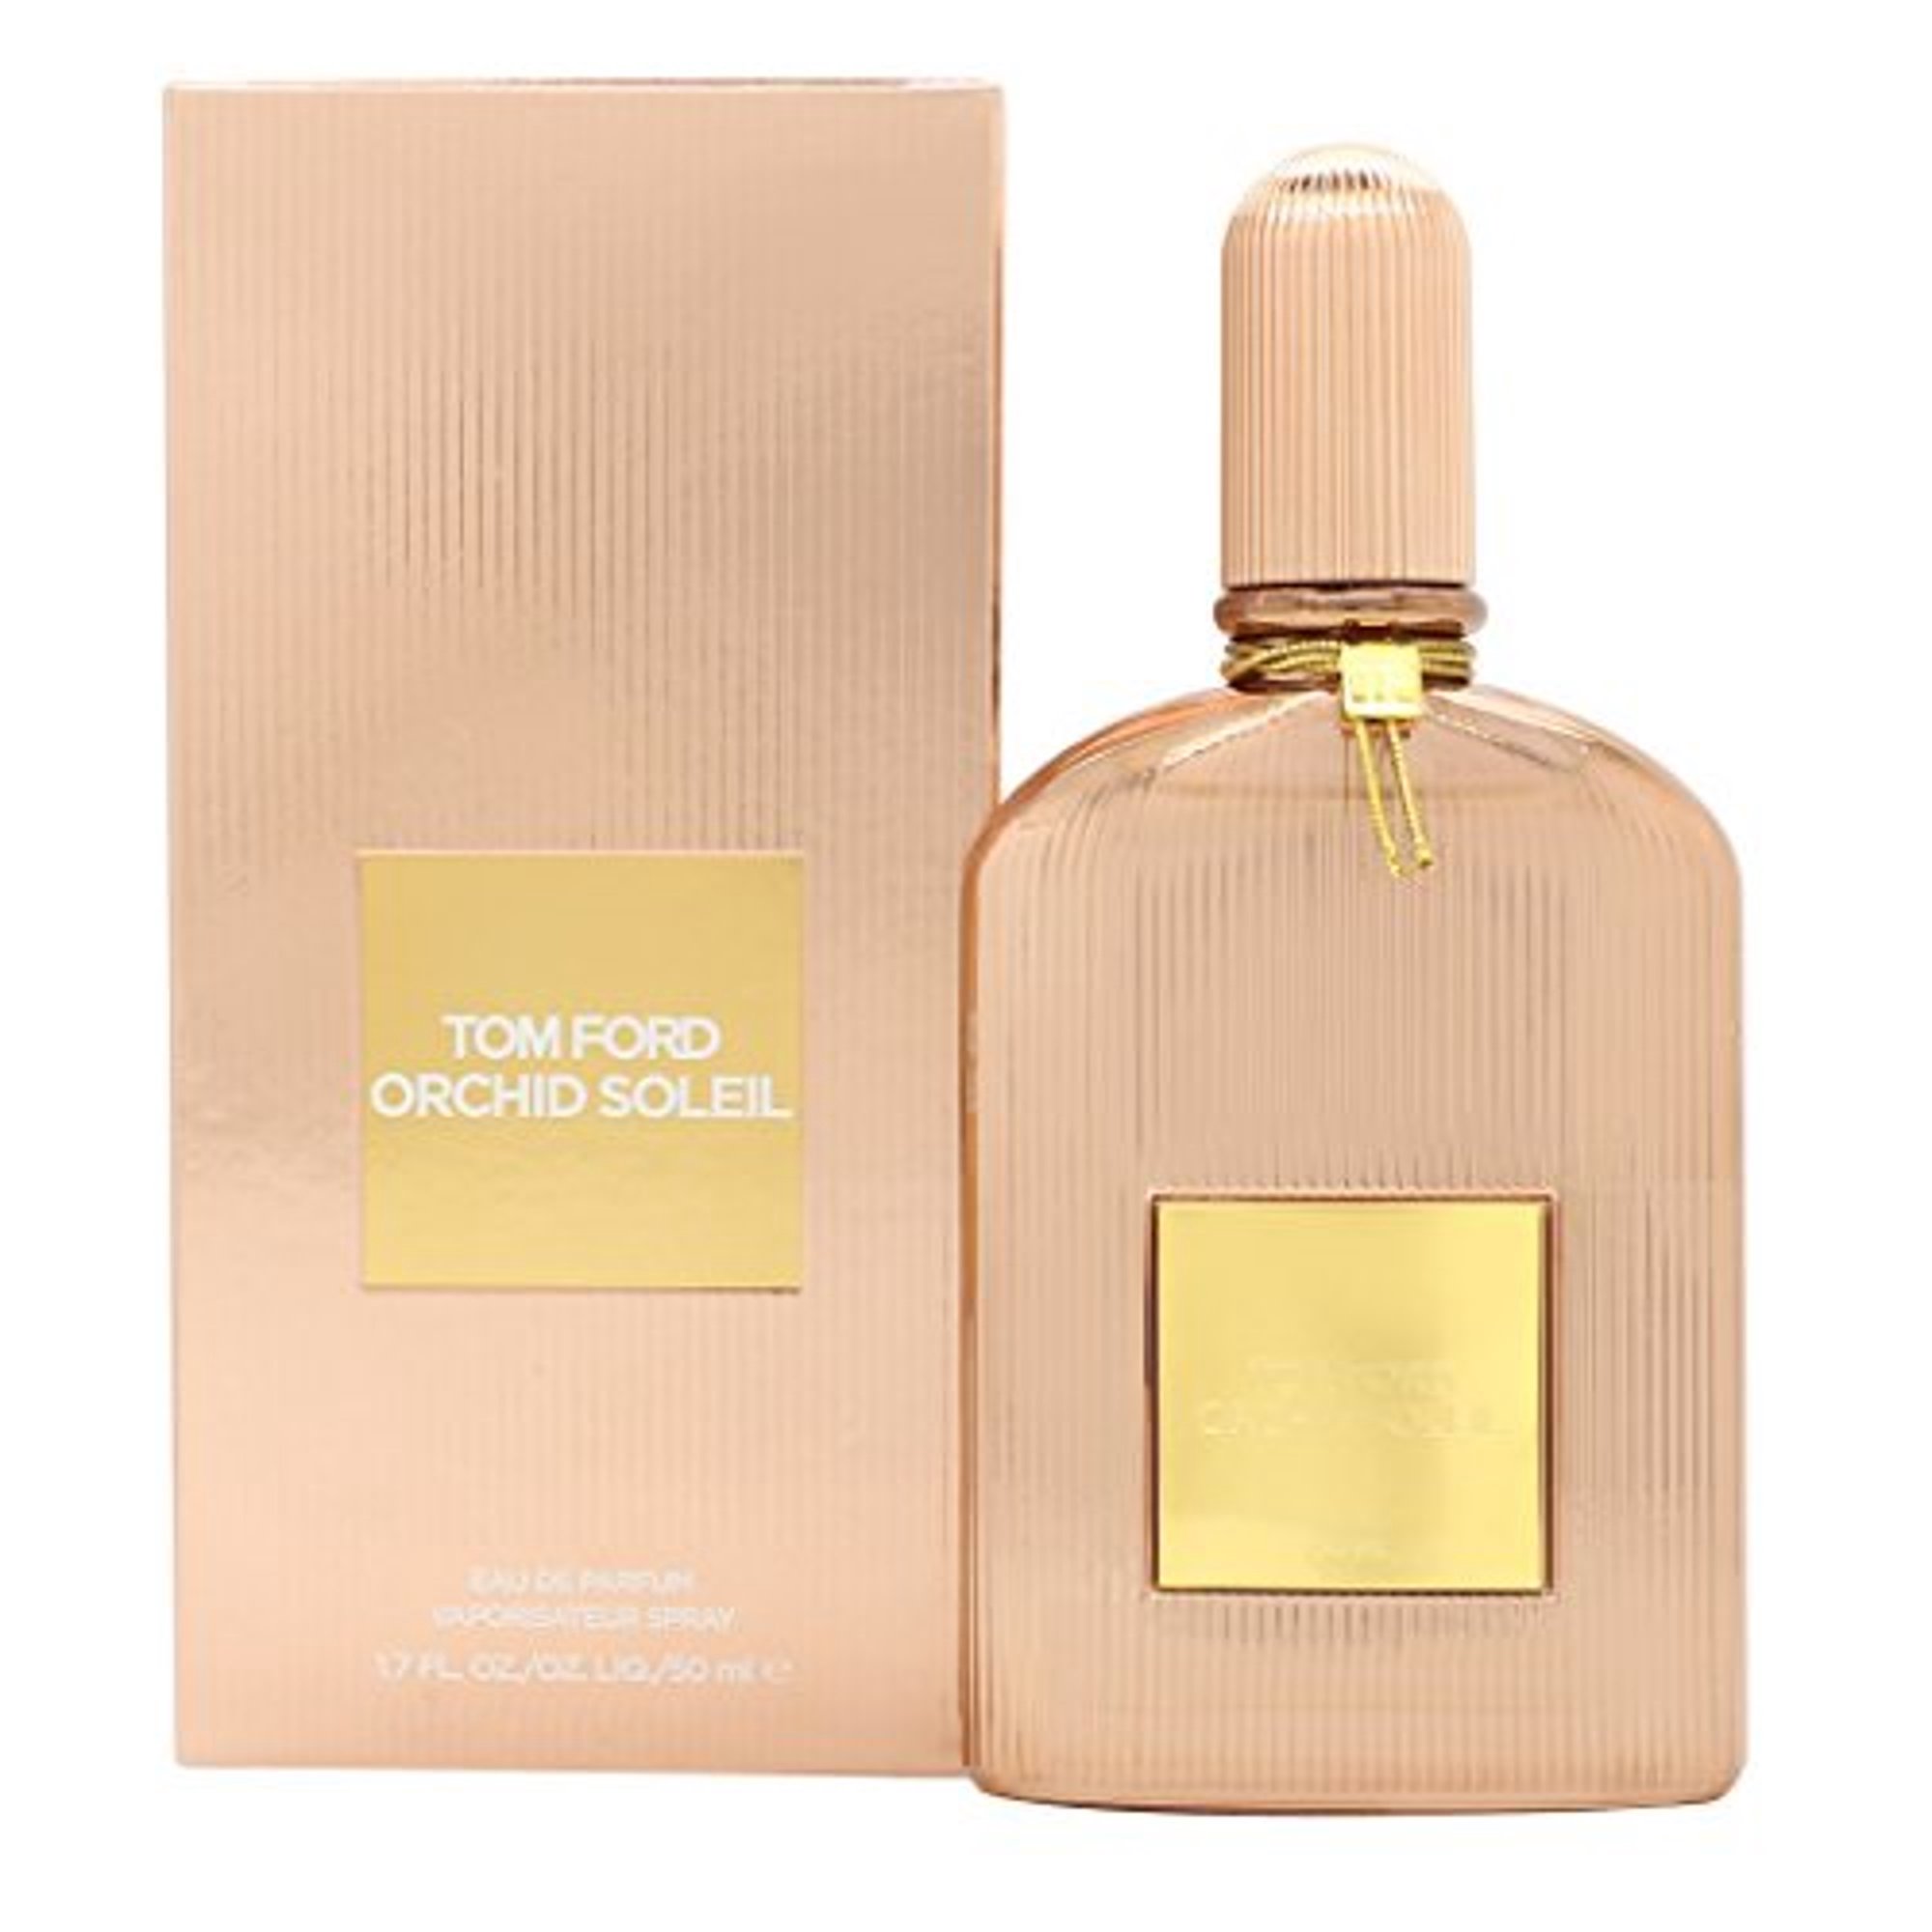 Том форд золотые духи. Tom Ford Orchid Soleil, EDP women 100 ml. Tom Ford "Orchid Soleil Eau de Parfum" 100 ml. Tom Ford Orchid Soleil. Tom Ford Black Orchid Parfum 50ml.